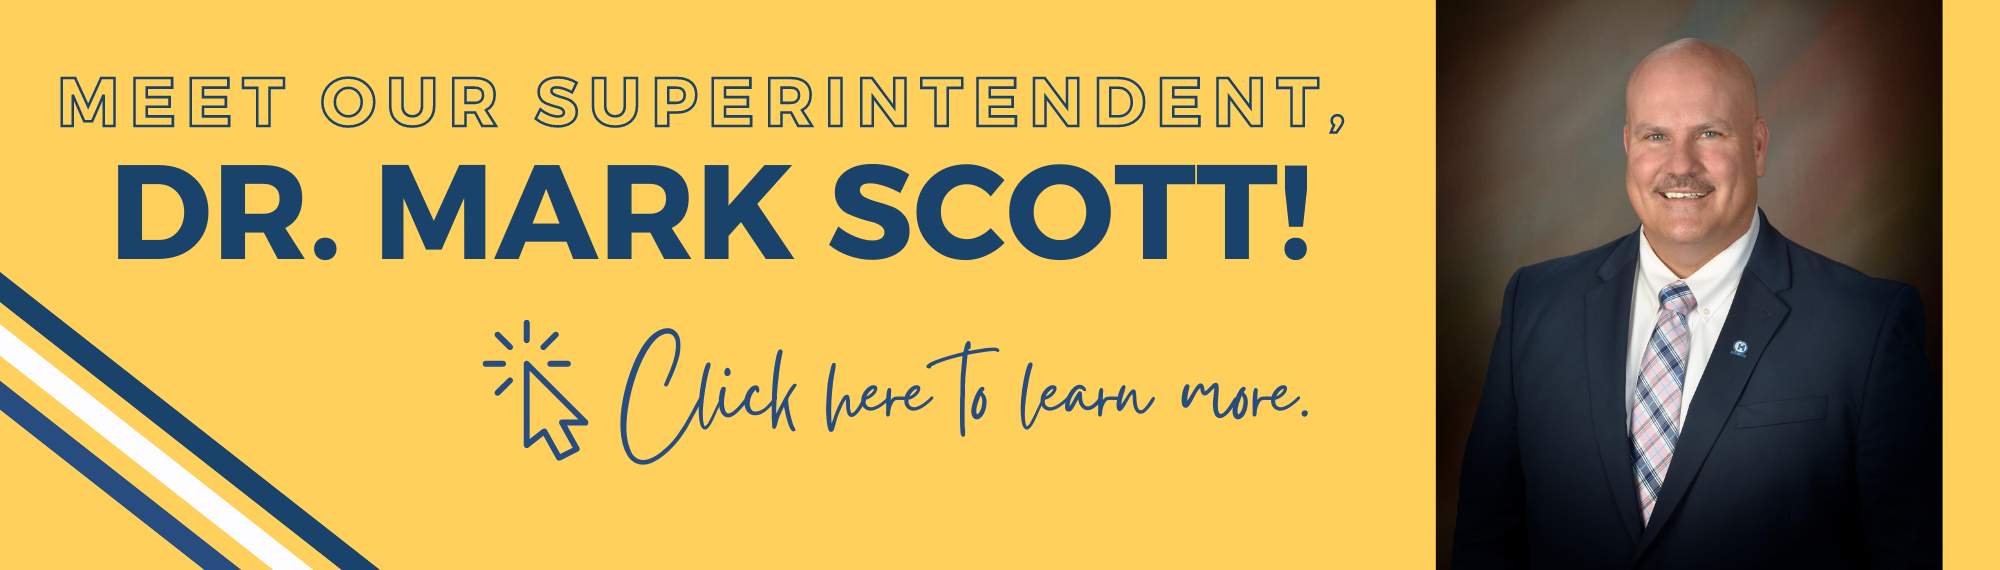 Meet our Superintendent, Dr. Mark Scott! Click here to learn more.